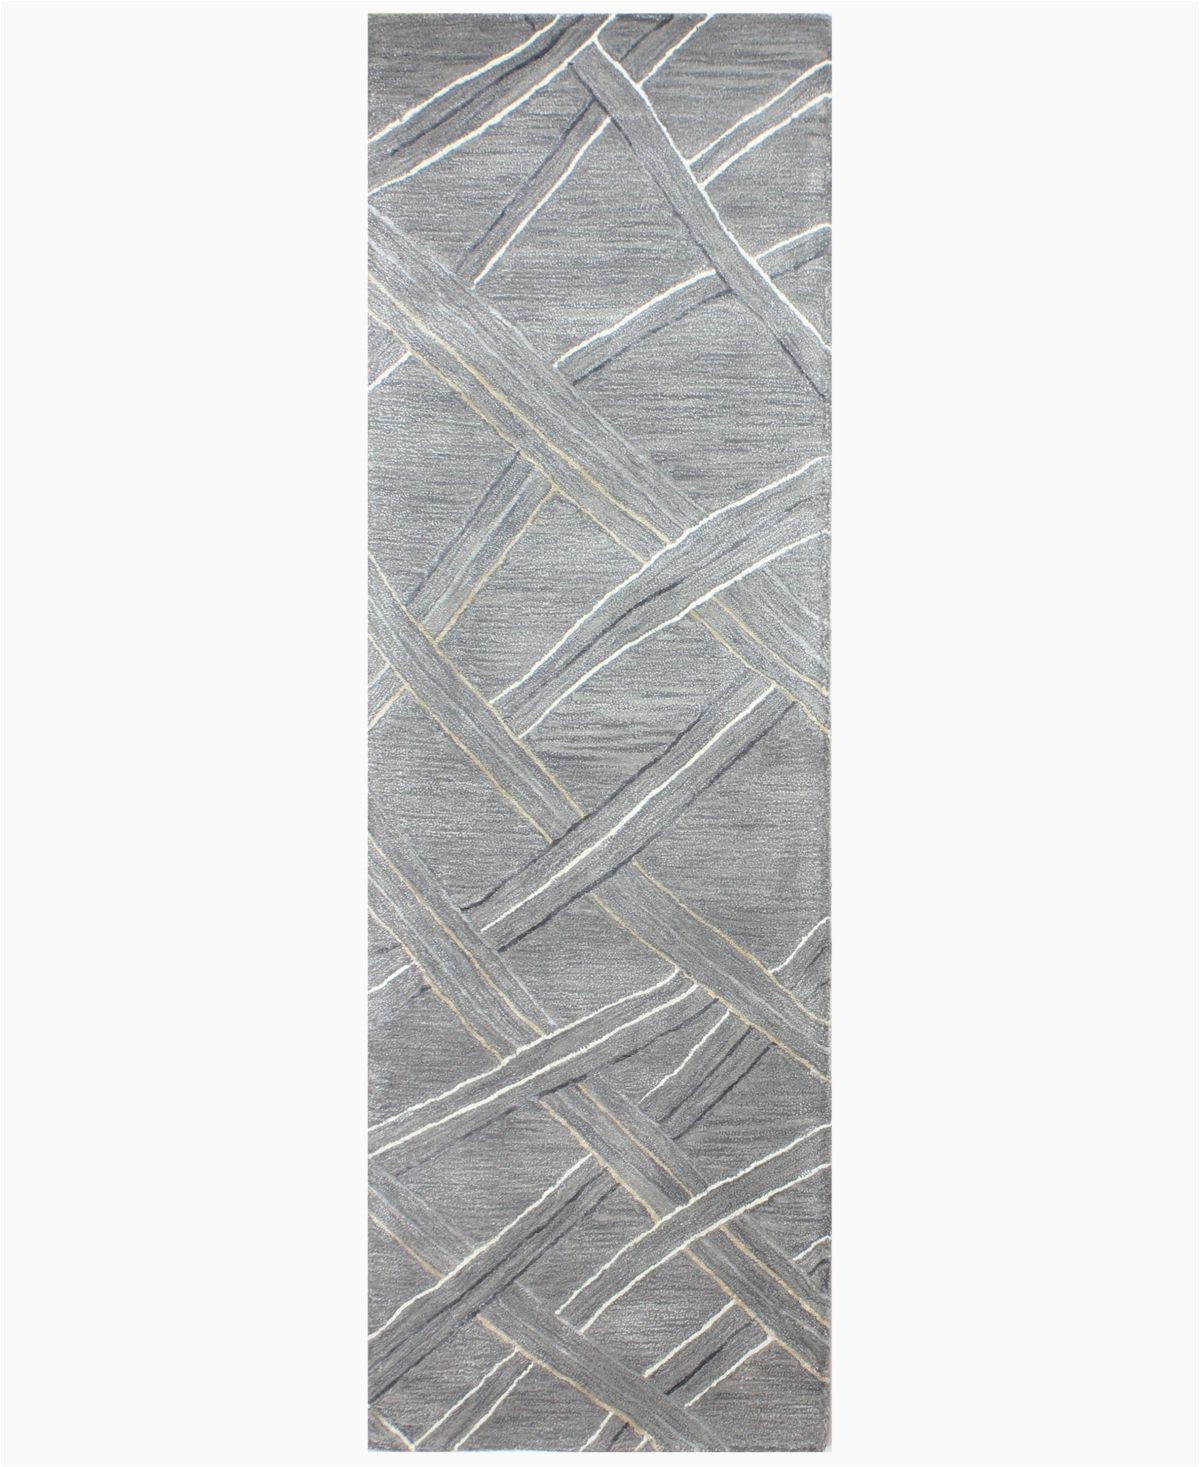 6 X 8 Gray area Rug Bb Rugs Downtown Hg351 Gray 2 6" X 8 Runner area Rug